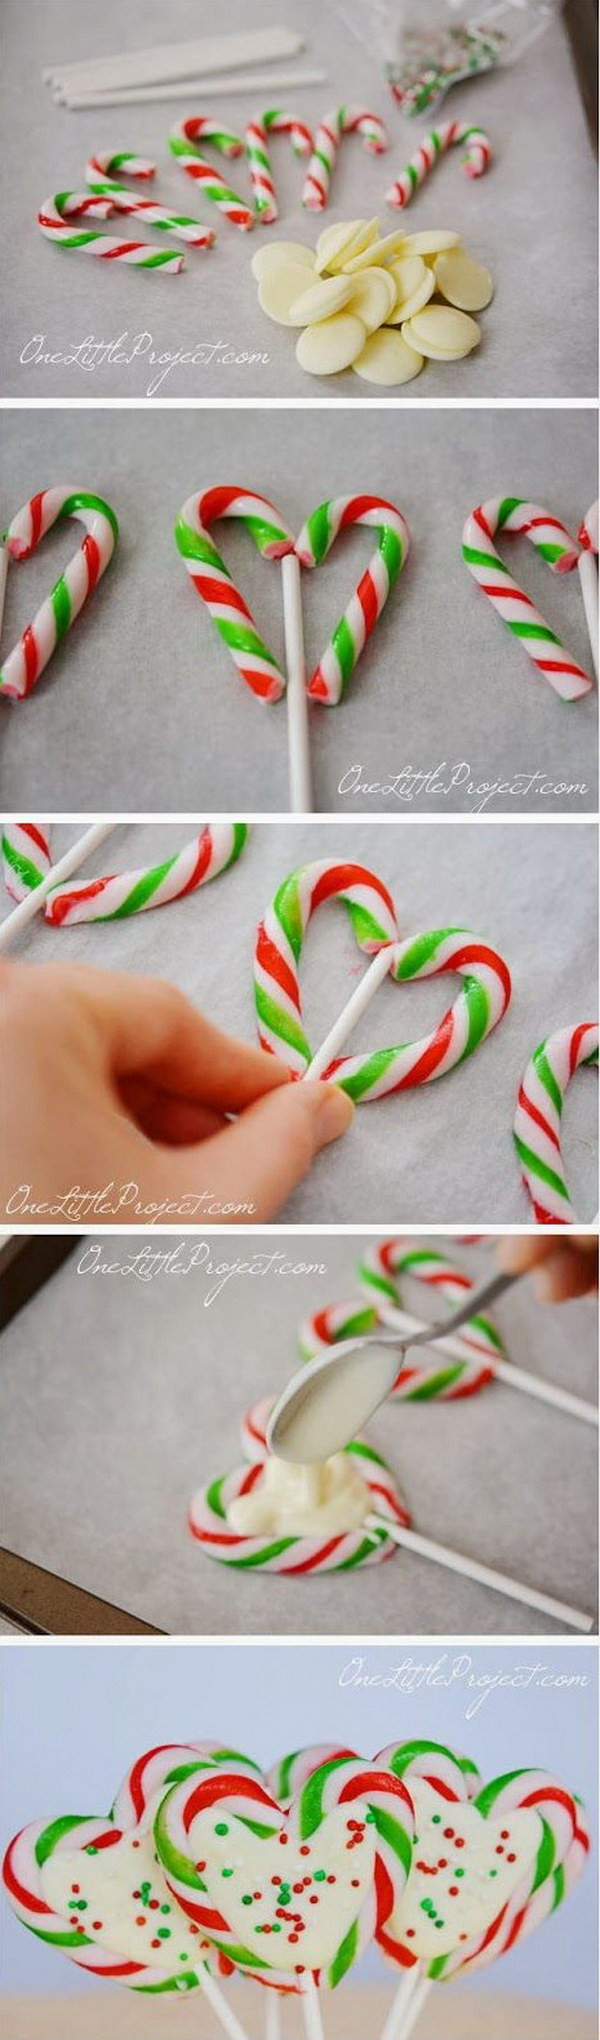 DIY Christmas Candy Gifts
 20 Awesome DIY Christmas Gift Ideas & Tutorials